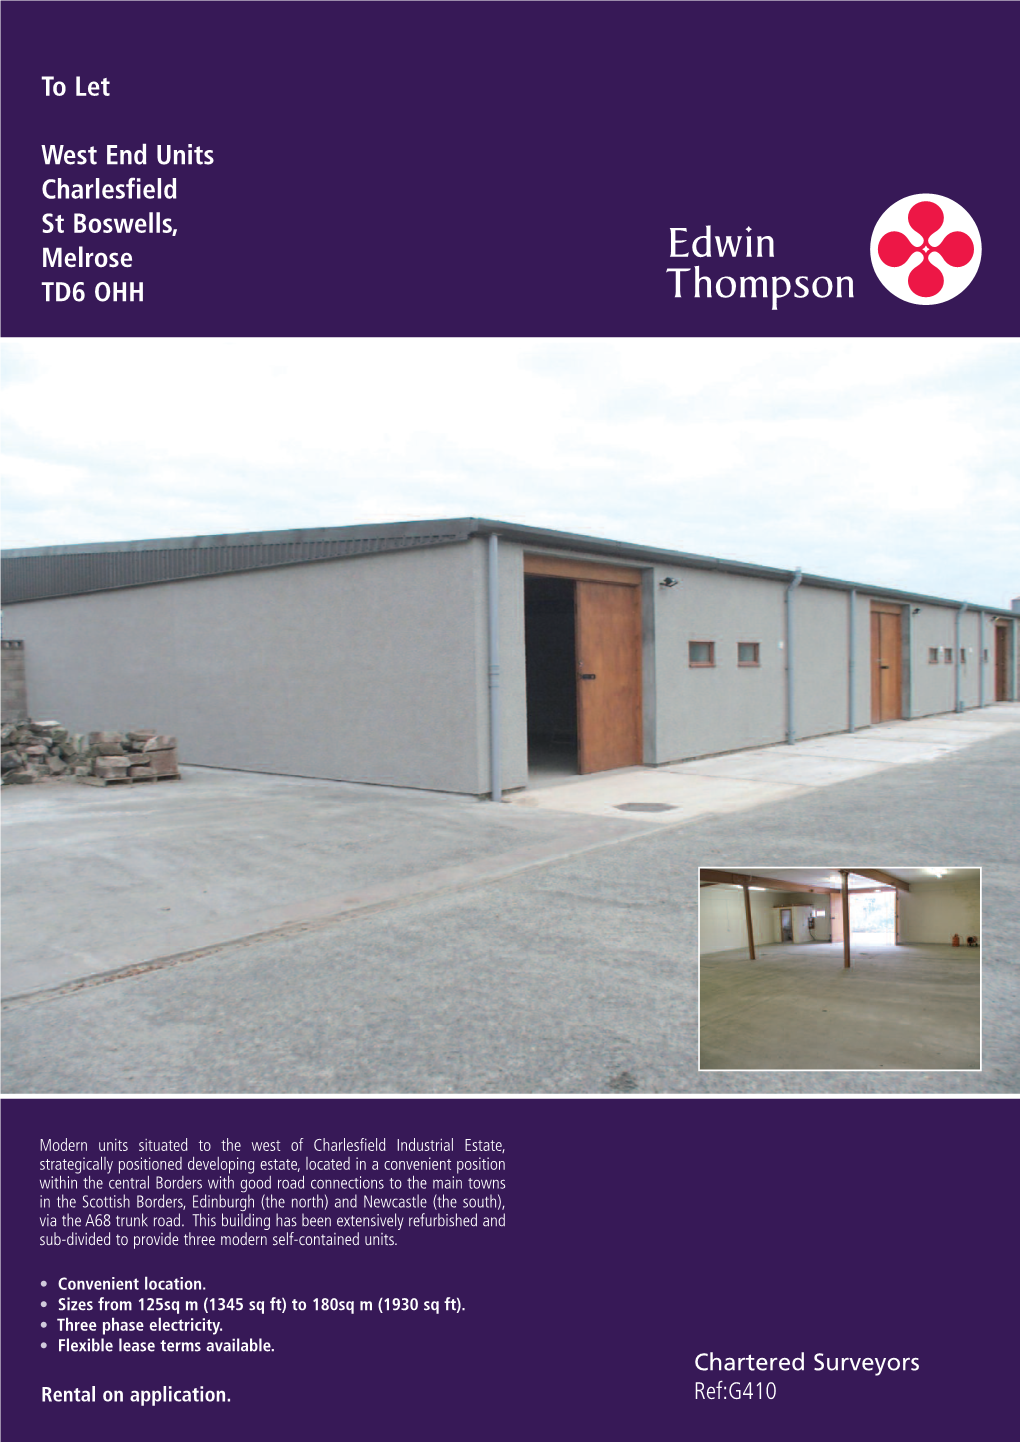 To Let West End Units Charlesfield St Boswells, Melrose TD6